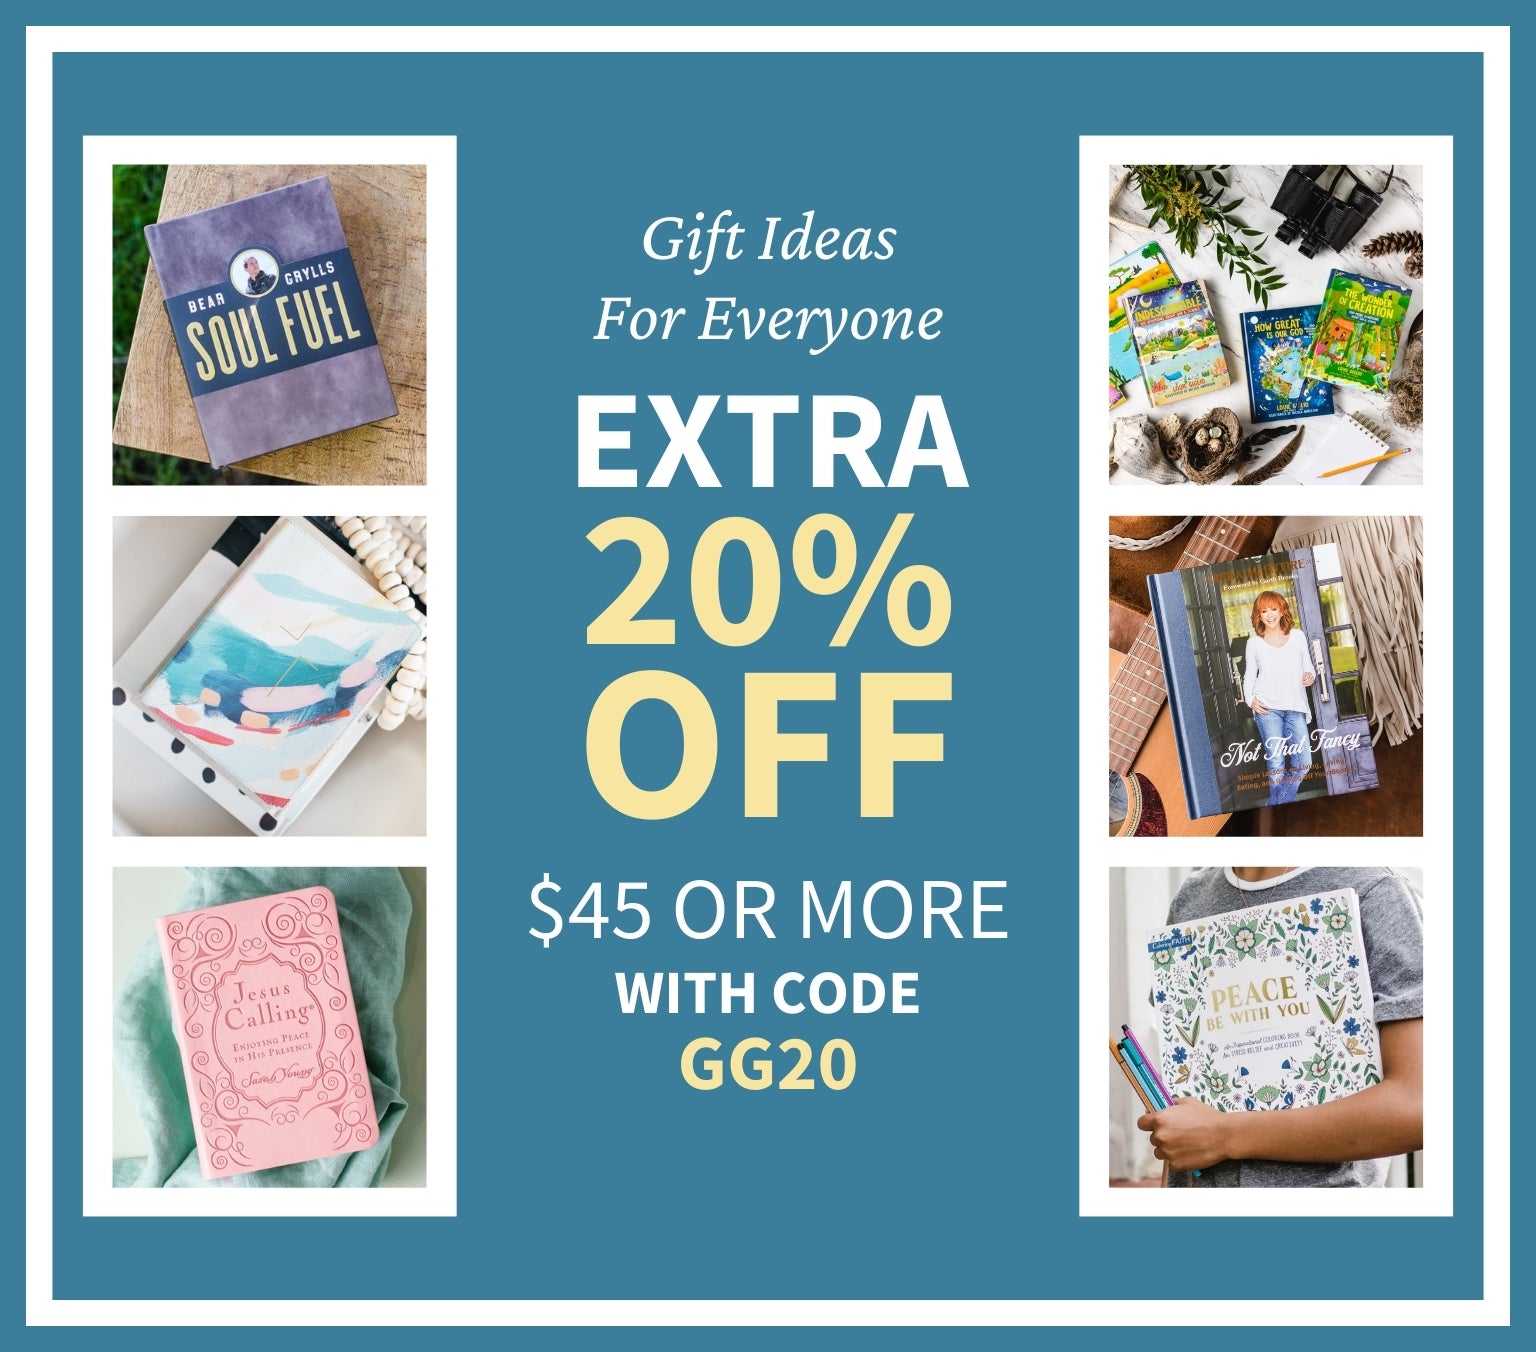 Gifts for everyone - take an extra 20% off $45 or more with code GG20